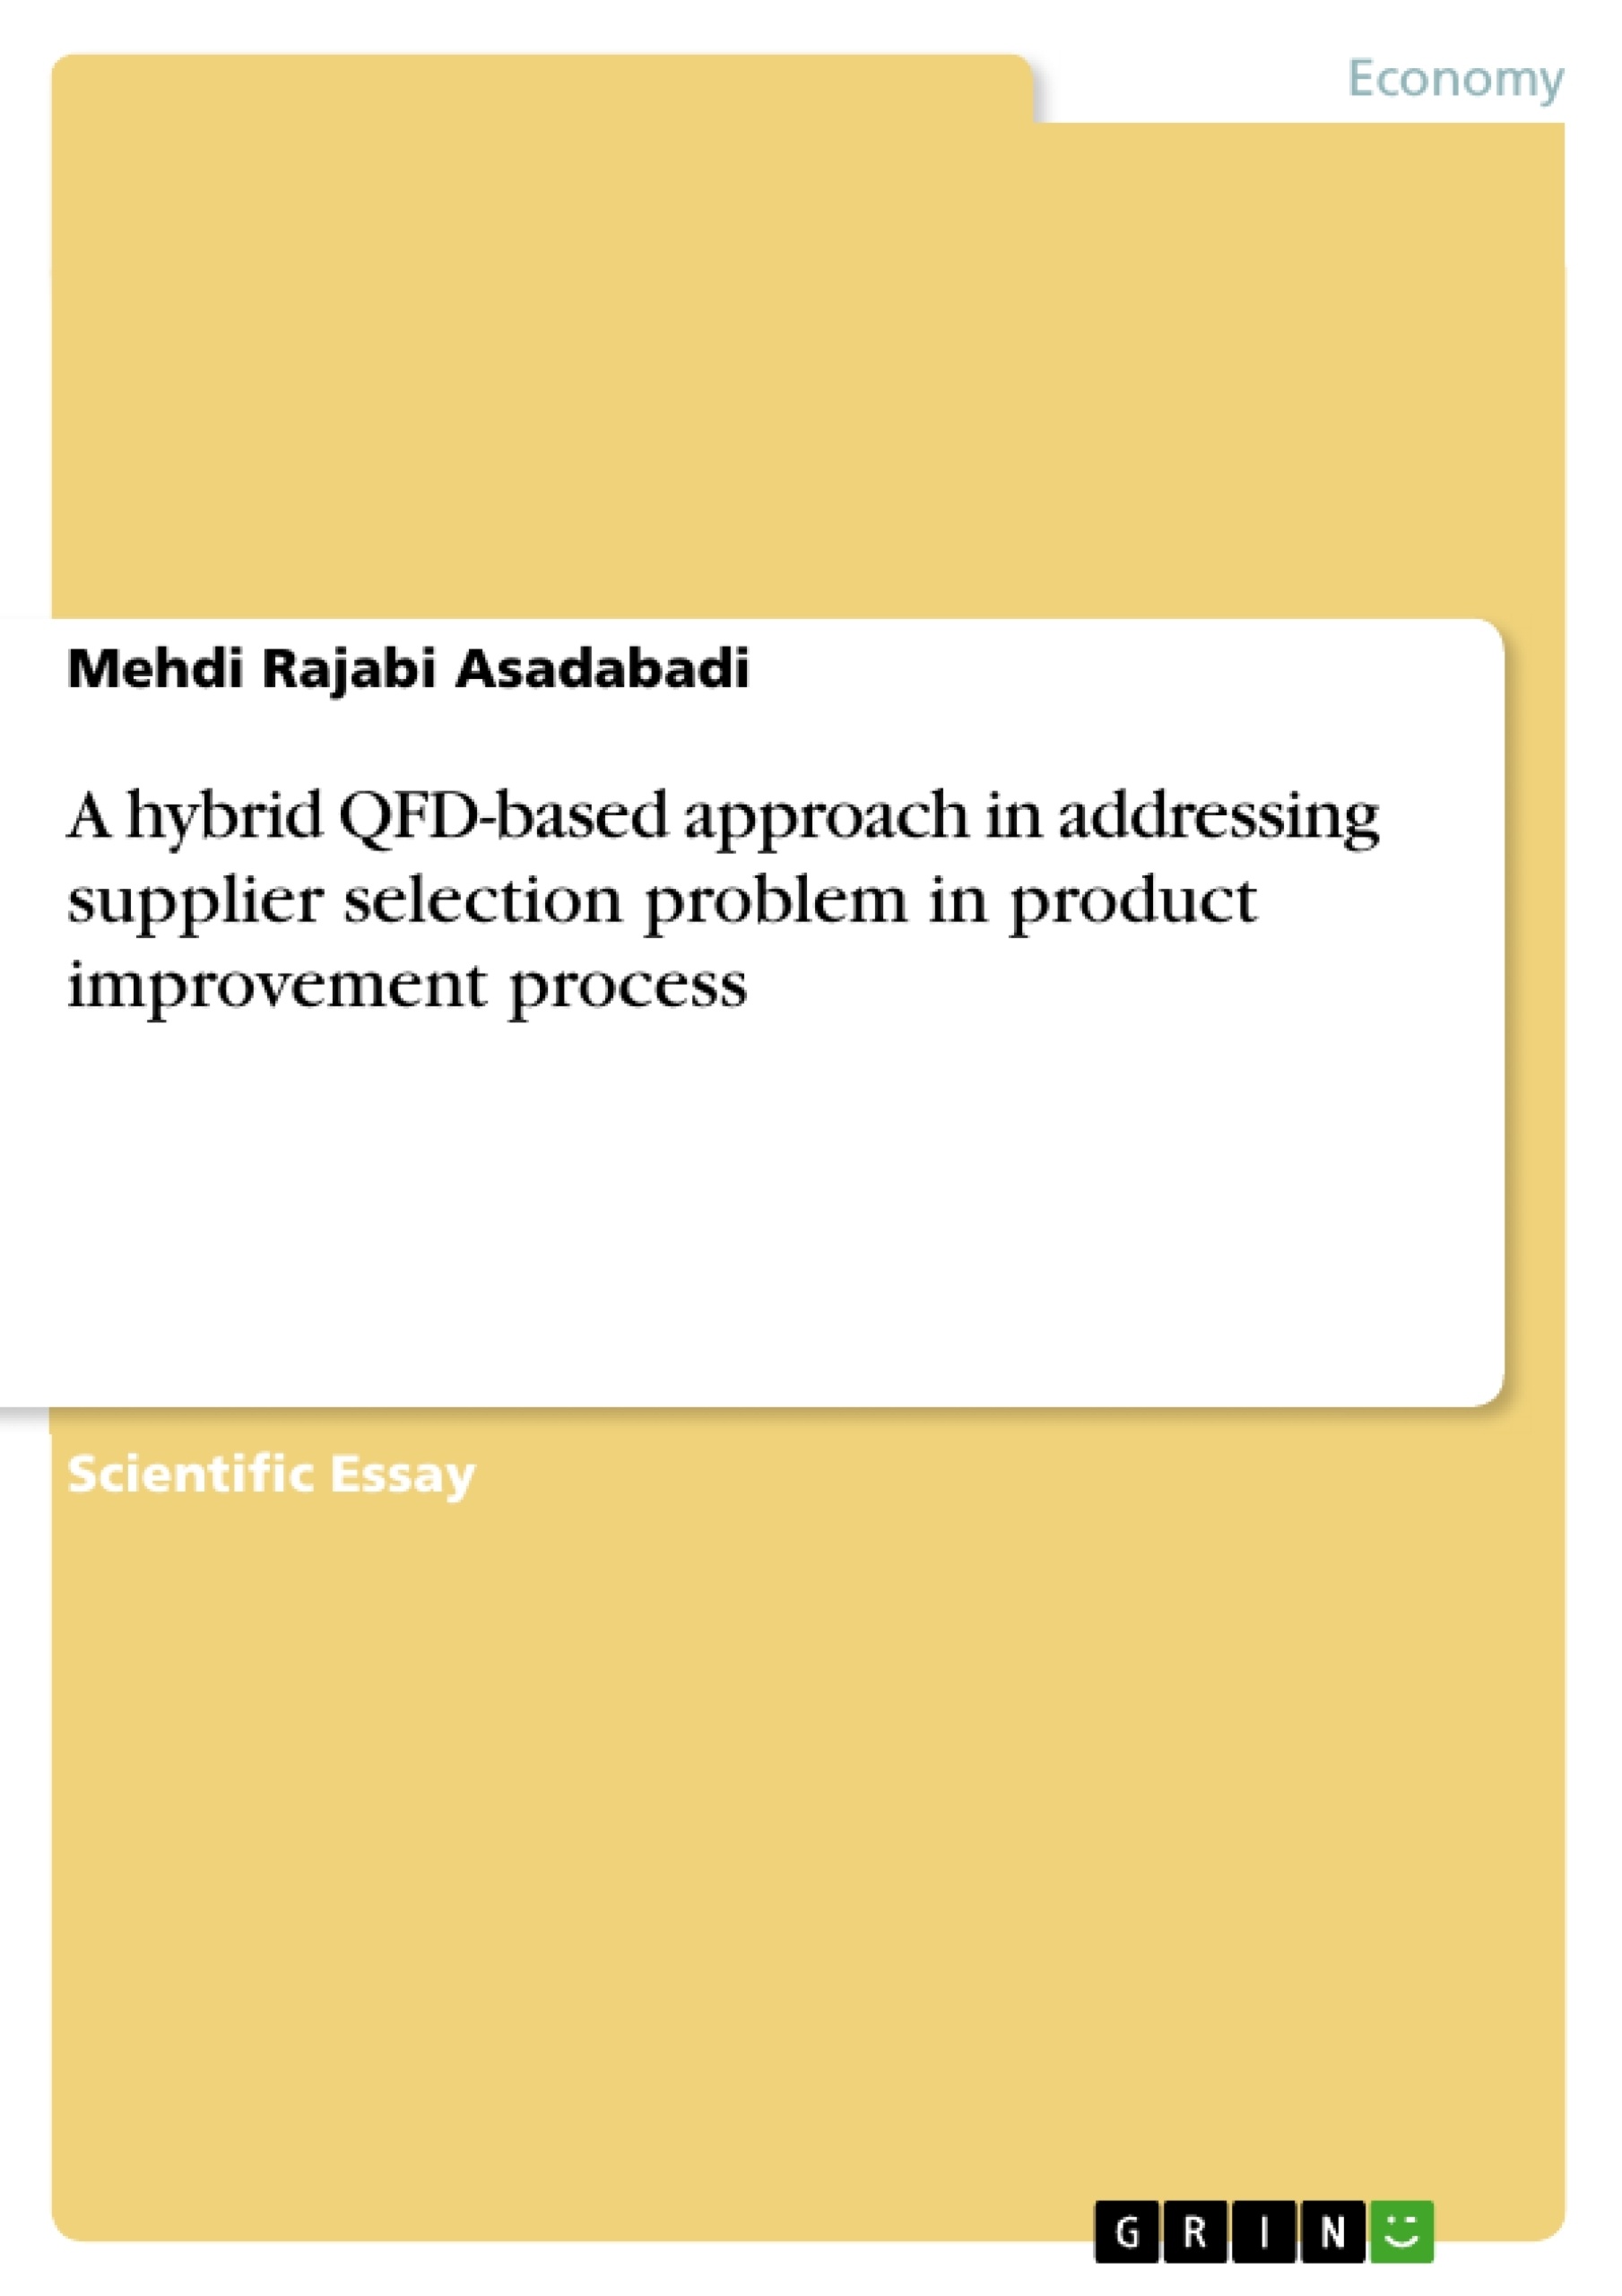 Título: A hybrid QFD-based approach in addressing supplier selection problem in product improvement process